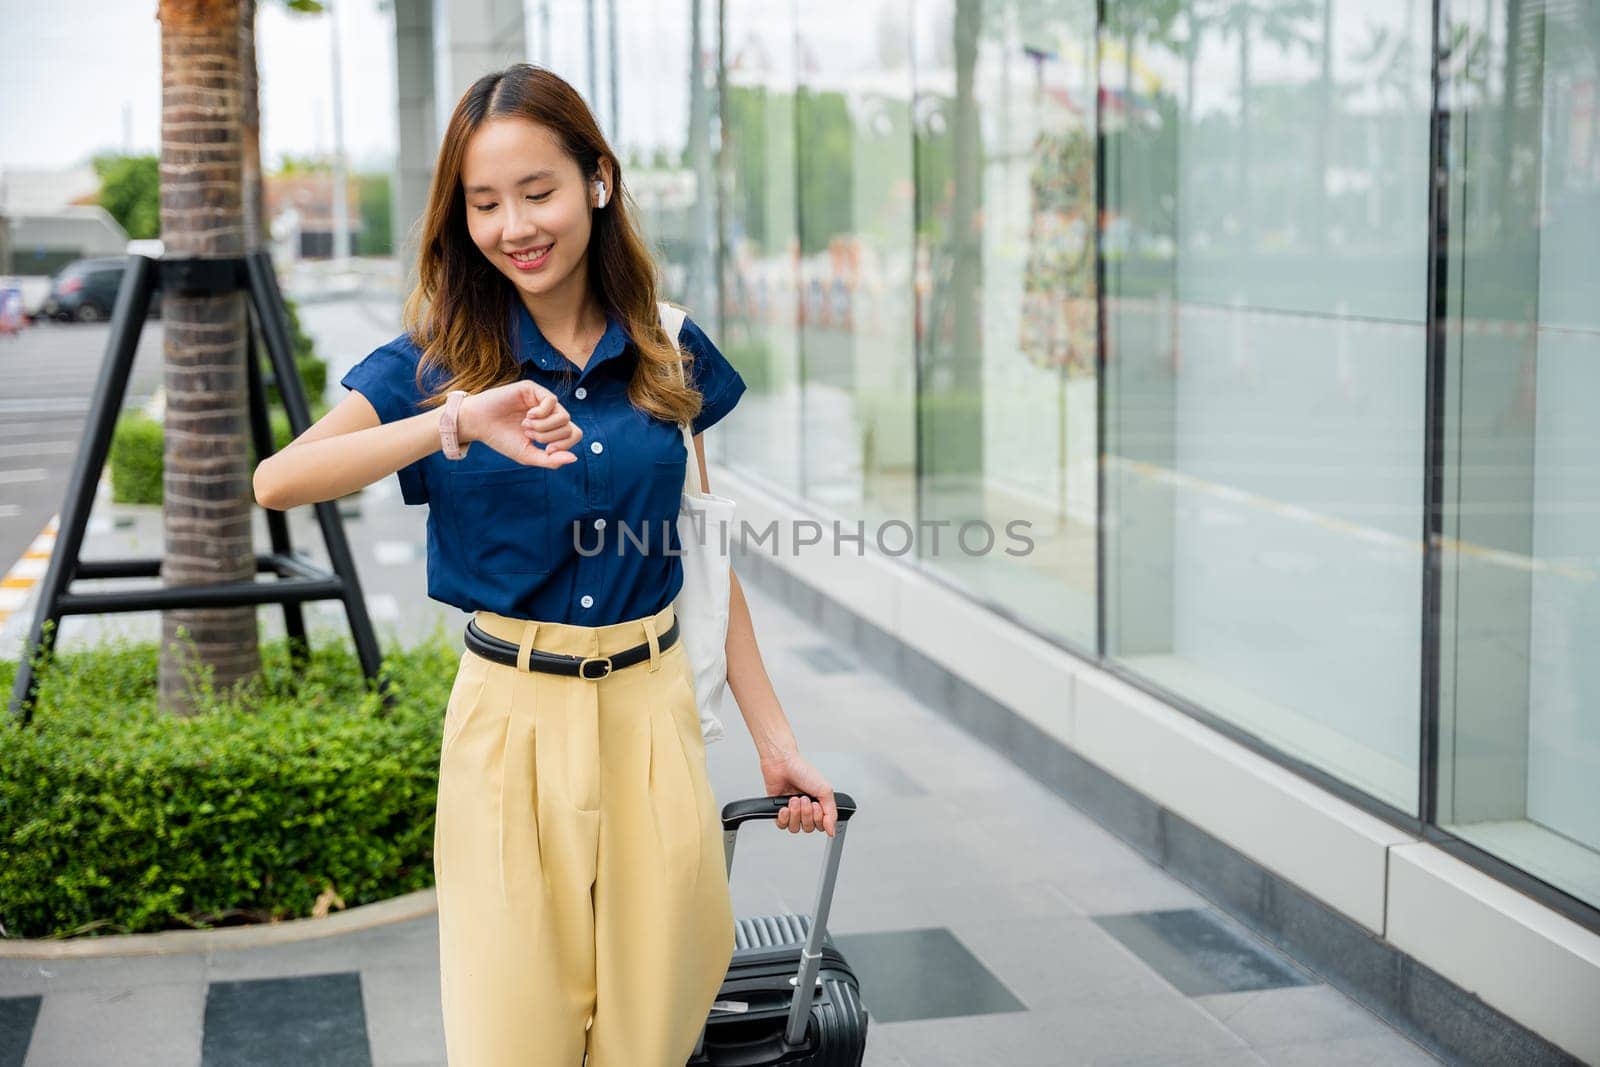 Young woman traveler waiting for her flight at the airport with her luggage and looking at the flight information display board. Time management and punctuality concept.